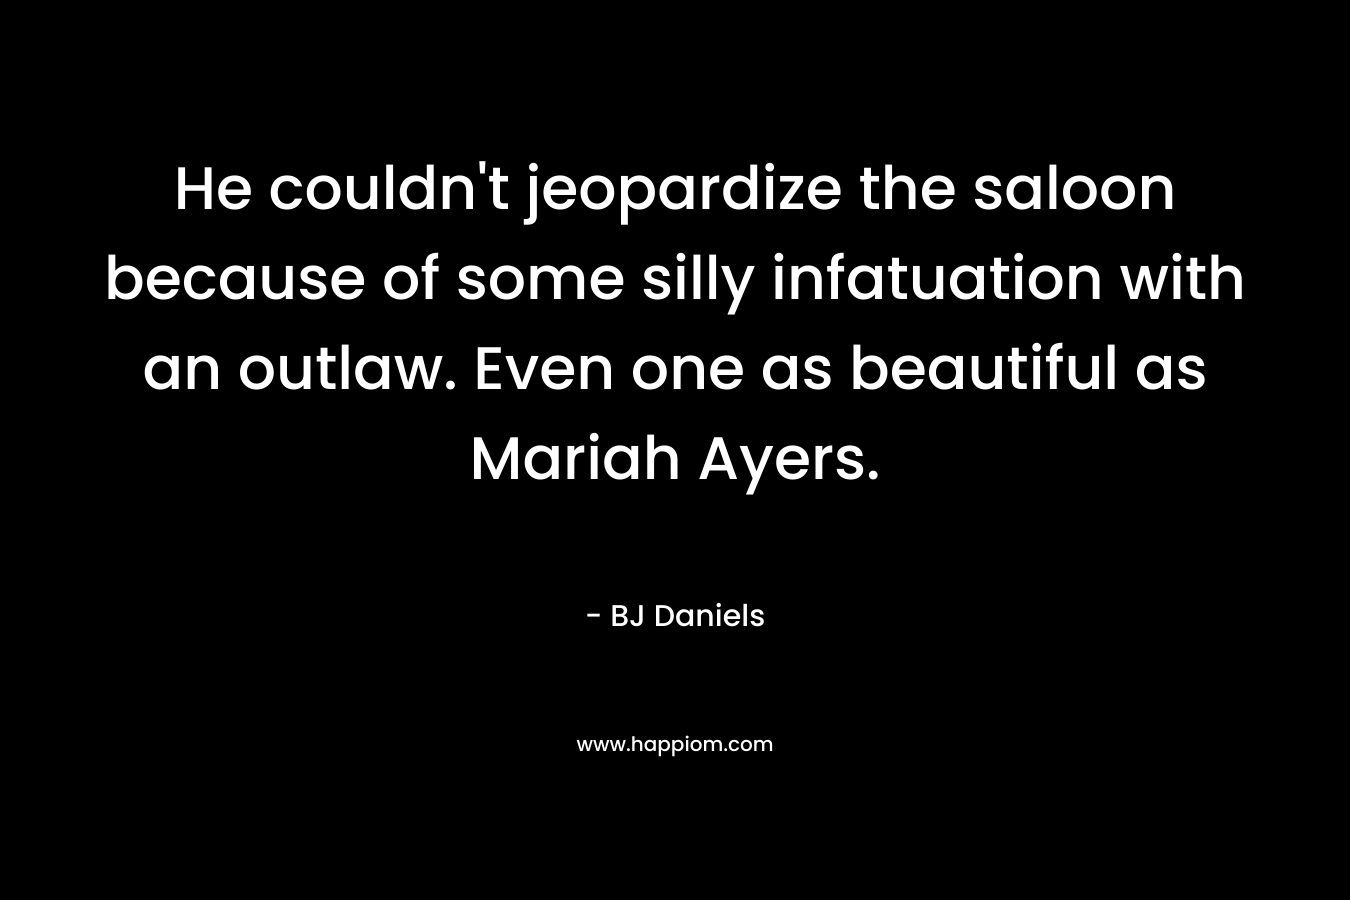 He couldn’t jeopardize the saloon because of some silly infatuation with an outlaw. Even one as beautiful as Mariah Ayers. – BJ Daniels